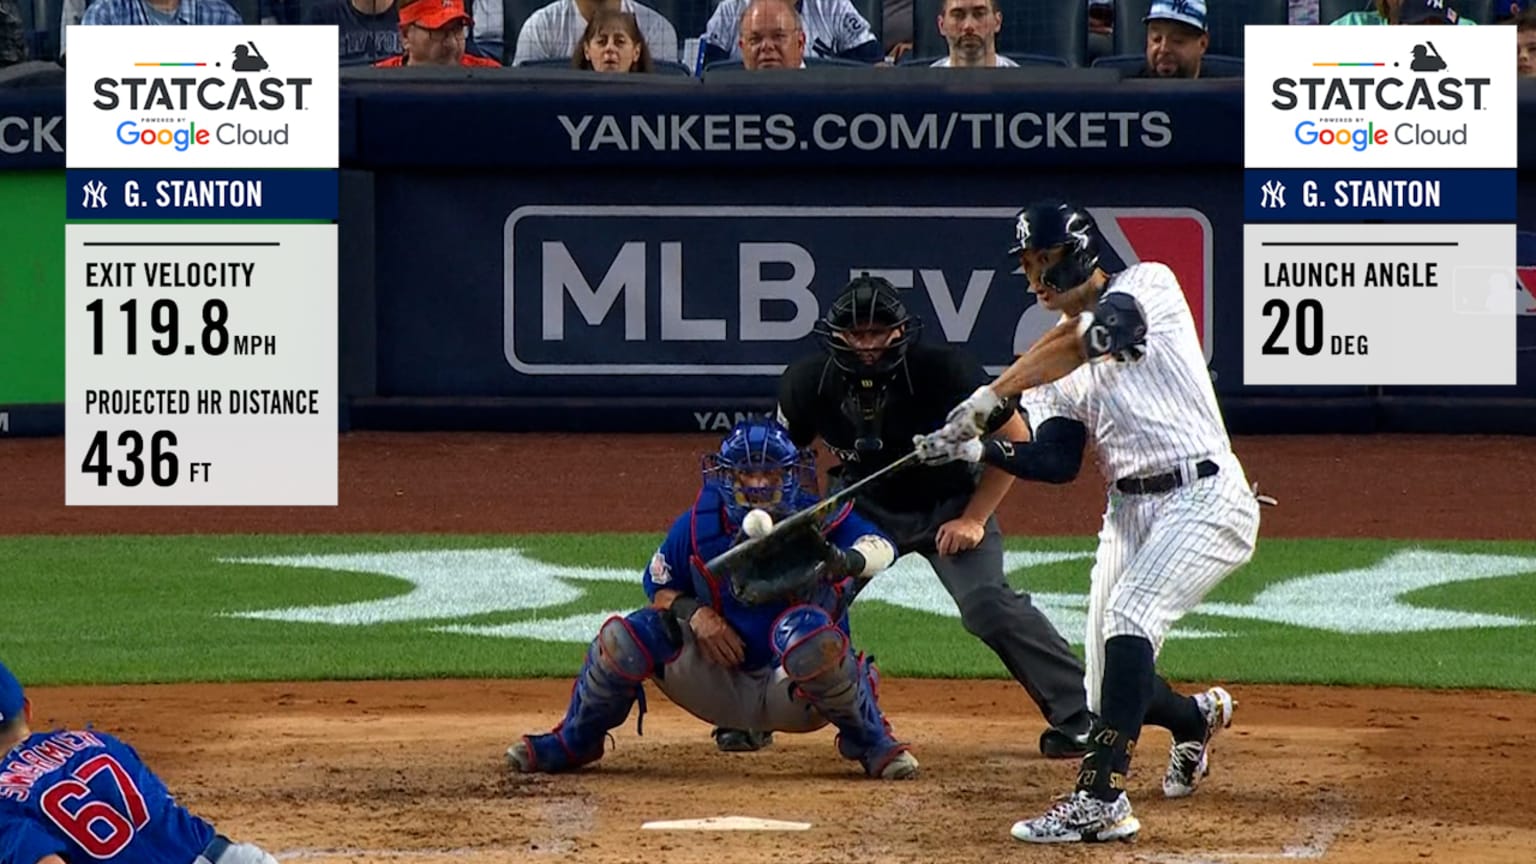 Stanton swings with his eyes closed every time. It's a fact. #mlb #spo